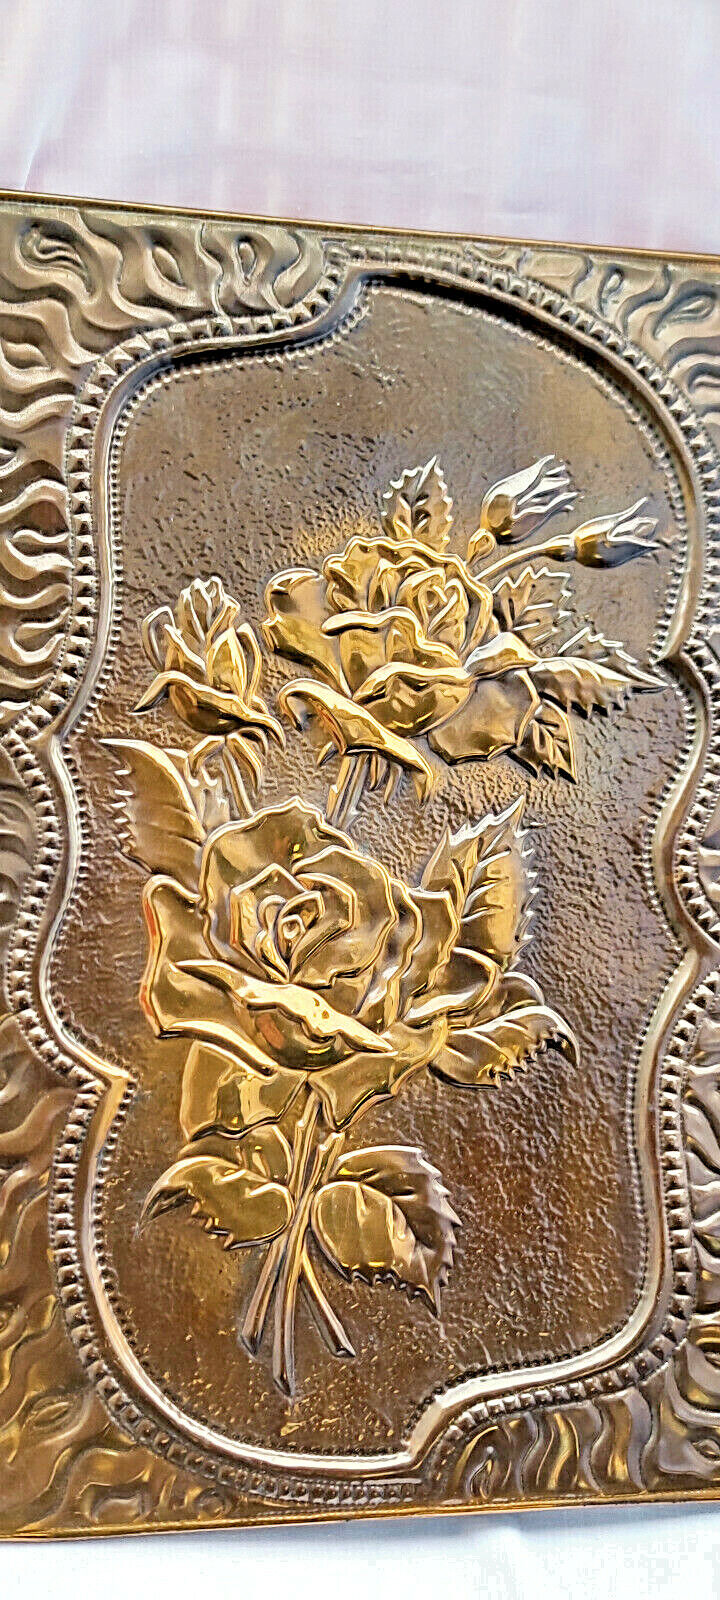 Very Big Flowers Chekanka Ussr Vintage Panno Knocked Stamping Embossed Picture